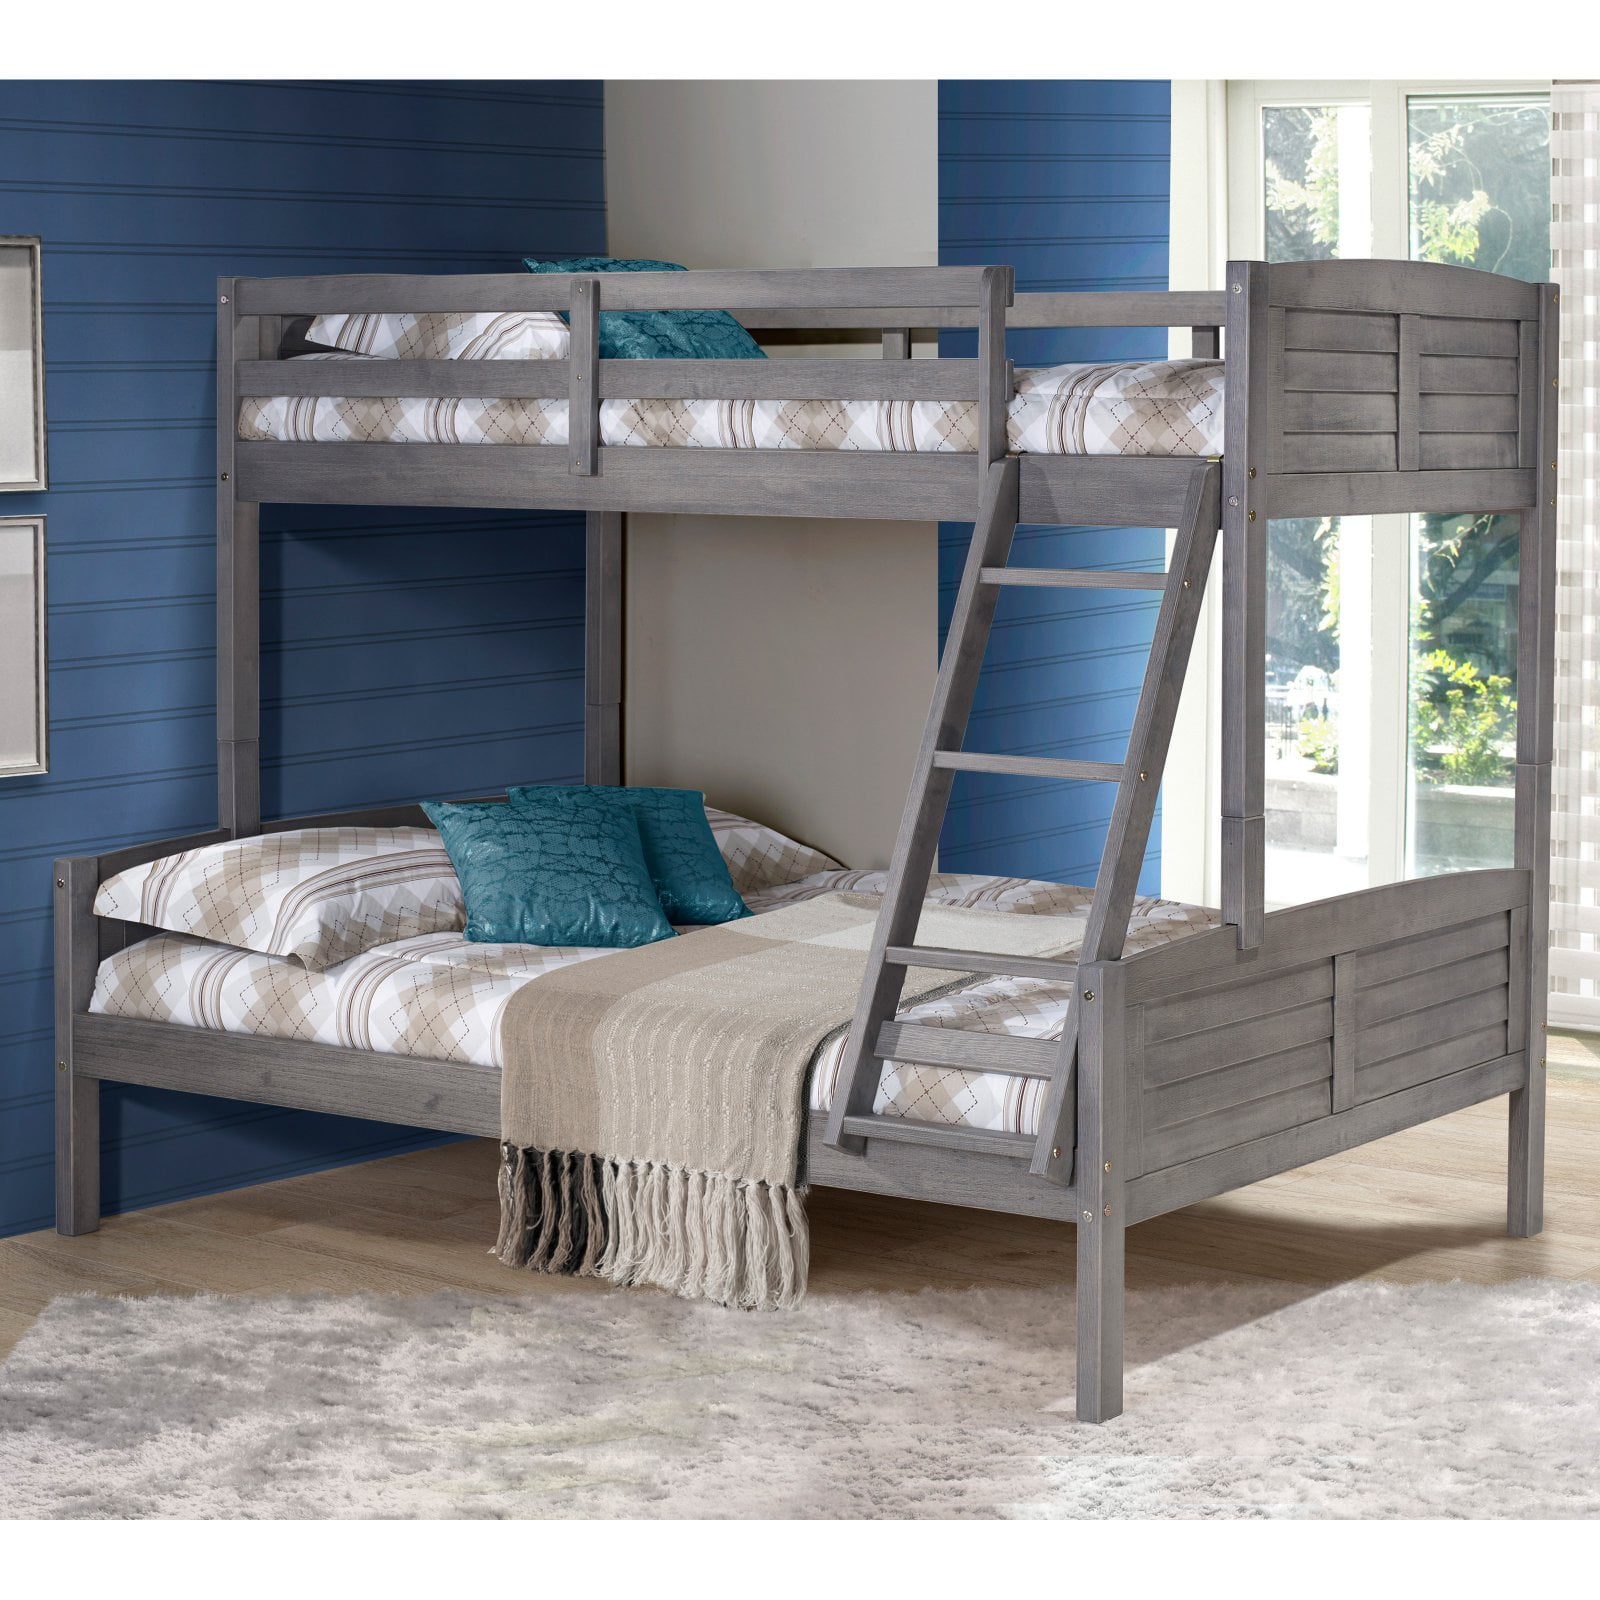 Donco Kids Louver Wood Bunk Bed Twin, Antique Wooden Bunk Beds